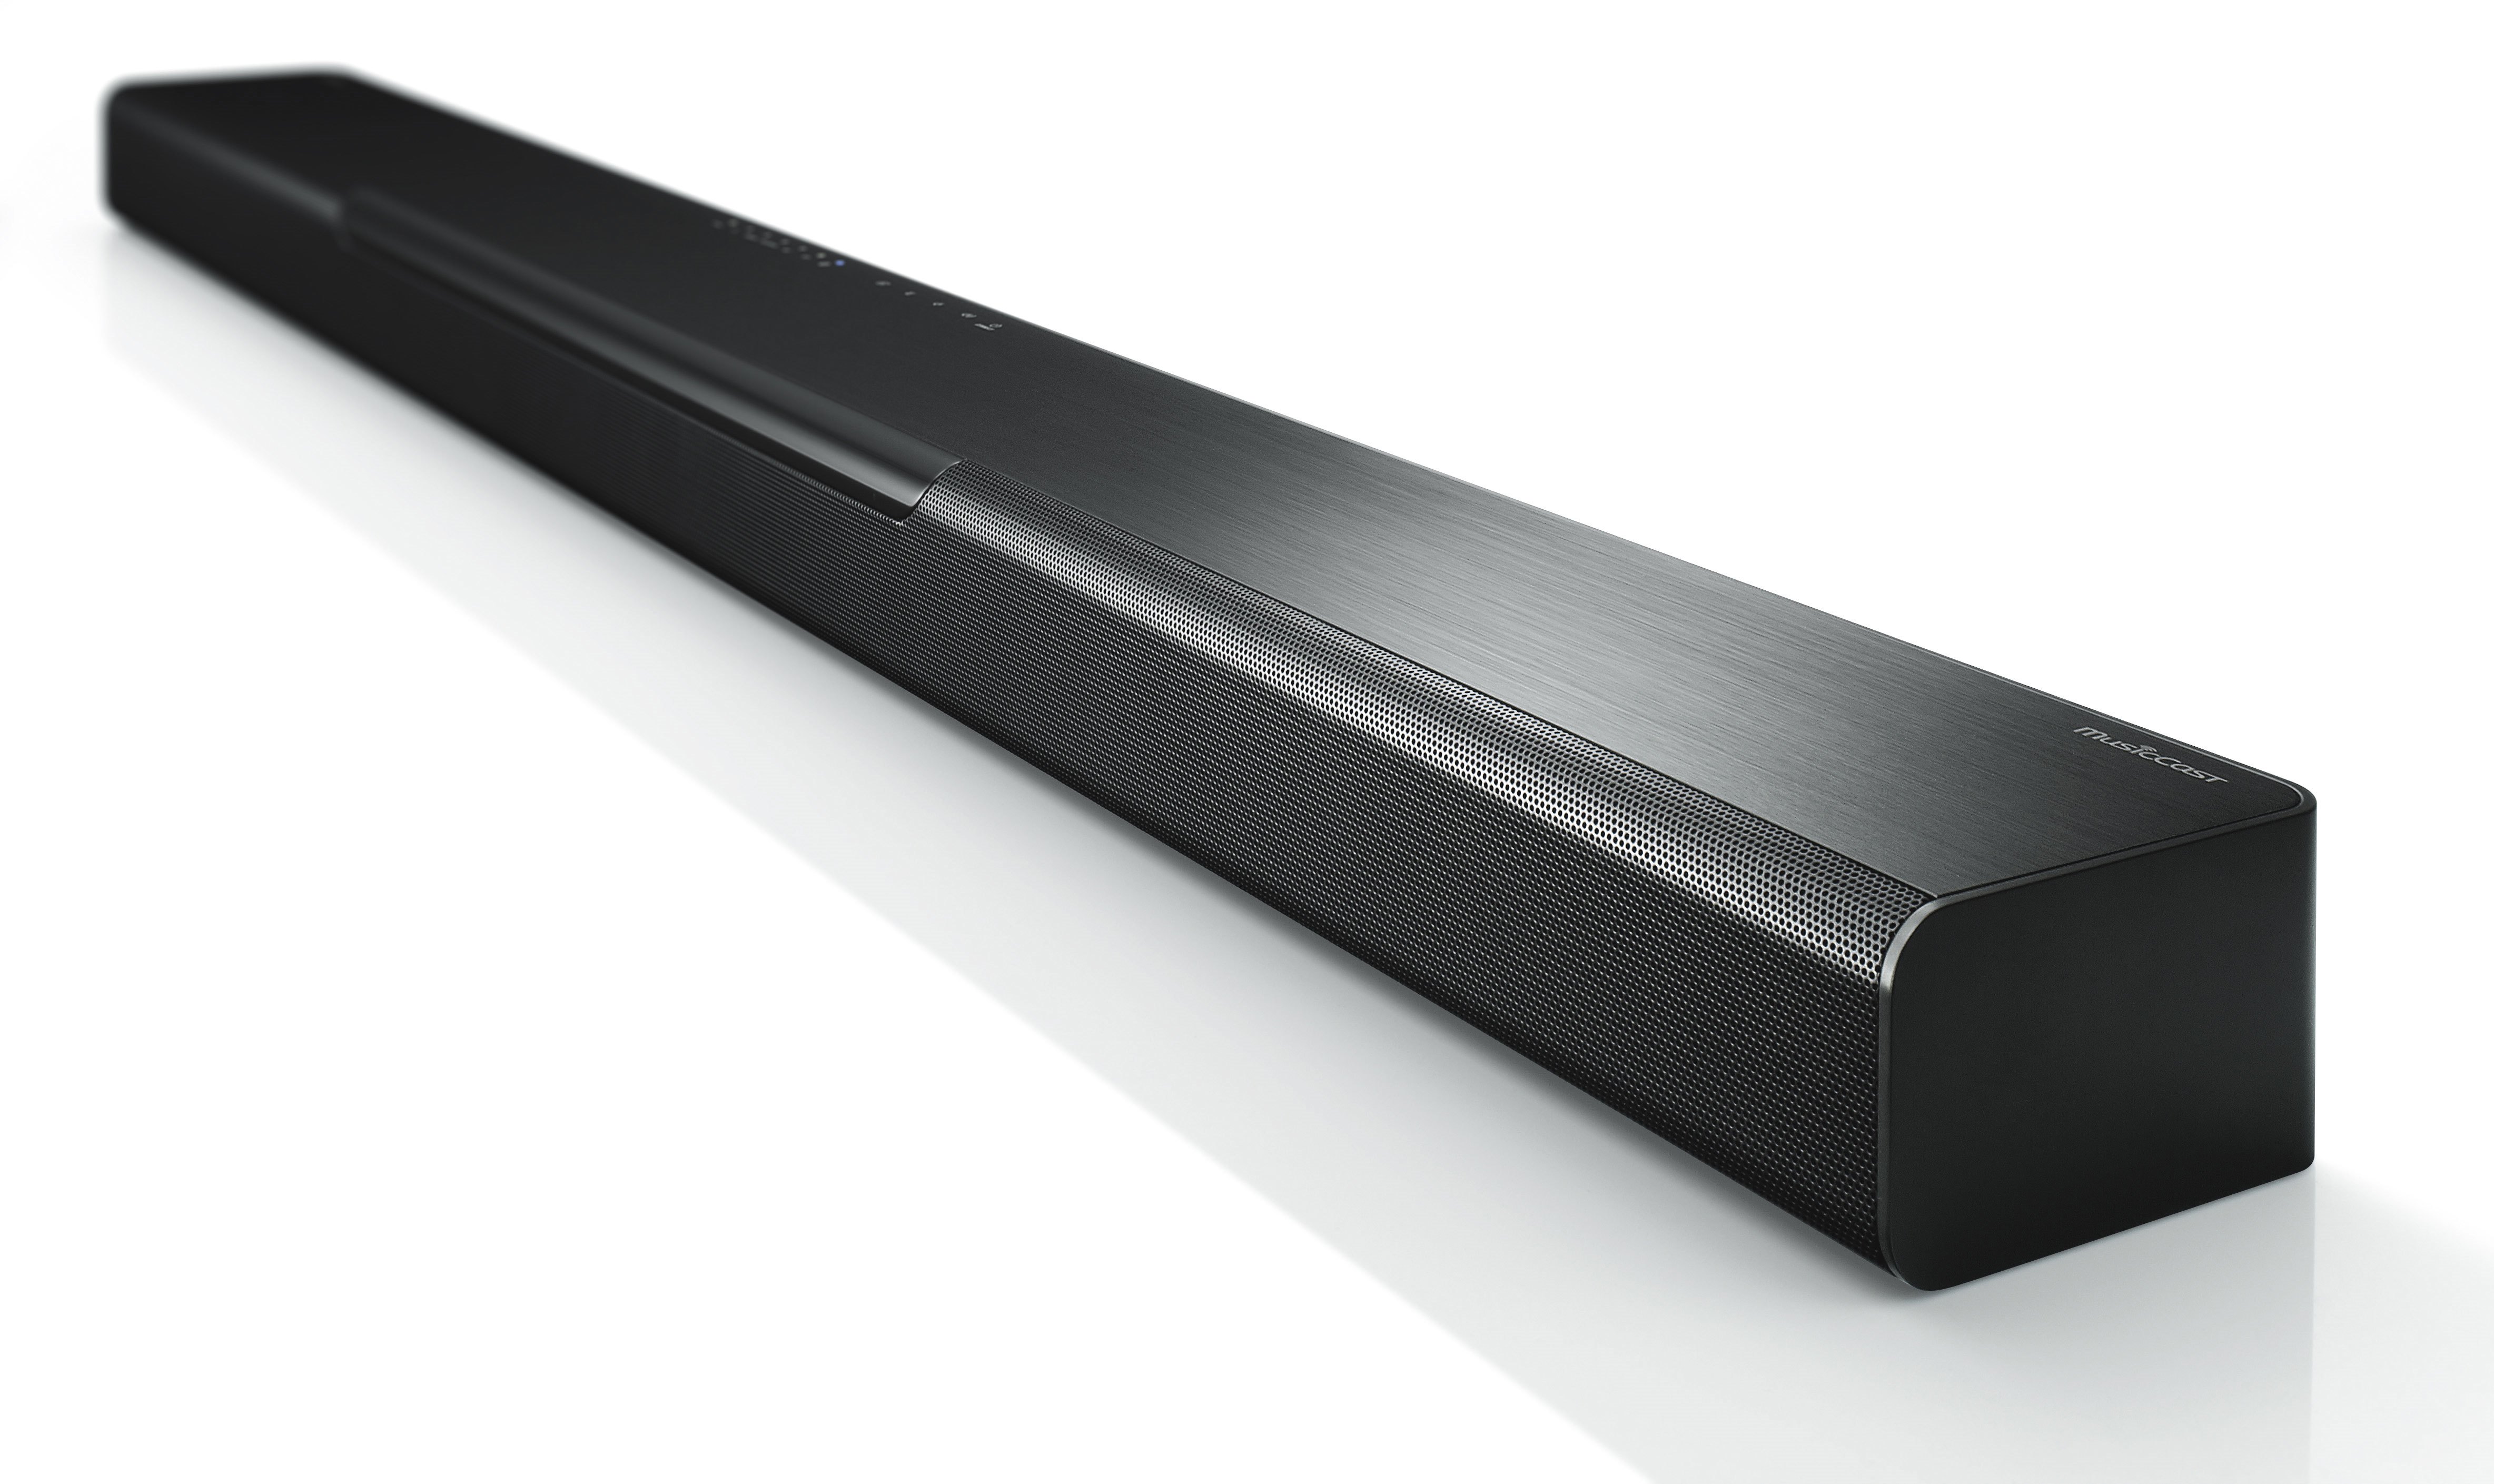 MusicCast BAR 400 - Specs - Sound Bars - Audio & Visual - Products 